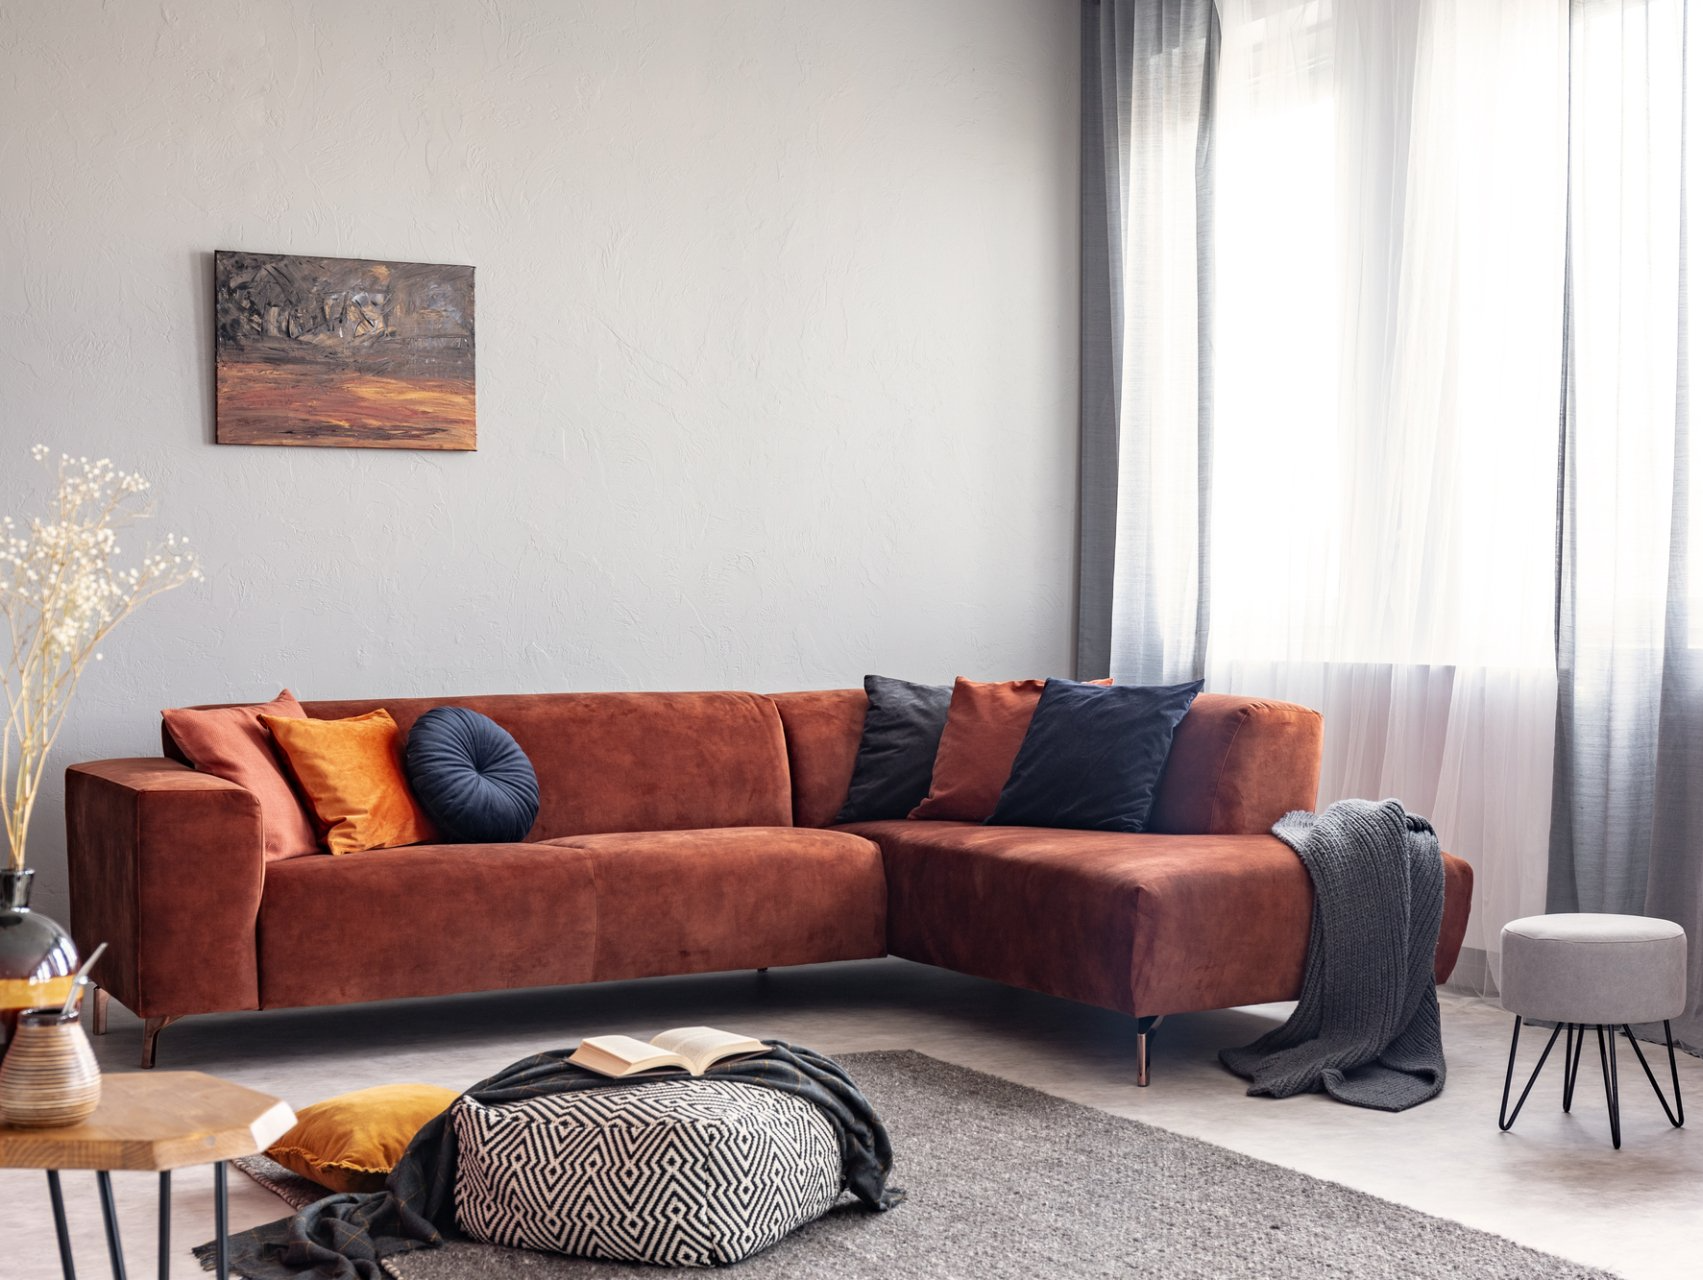 Rust coloured soft lounge with black and gold cushions in comfy lounge setting framed by grey curtains open over sheers letting light flow into the room.